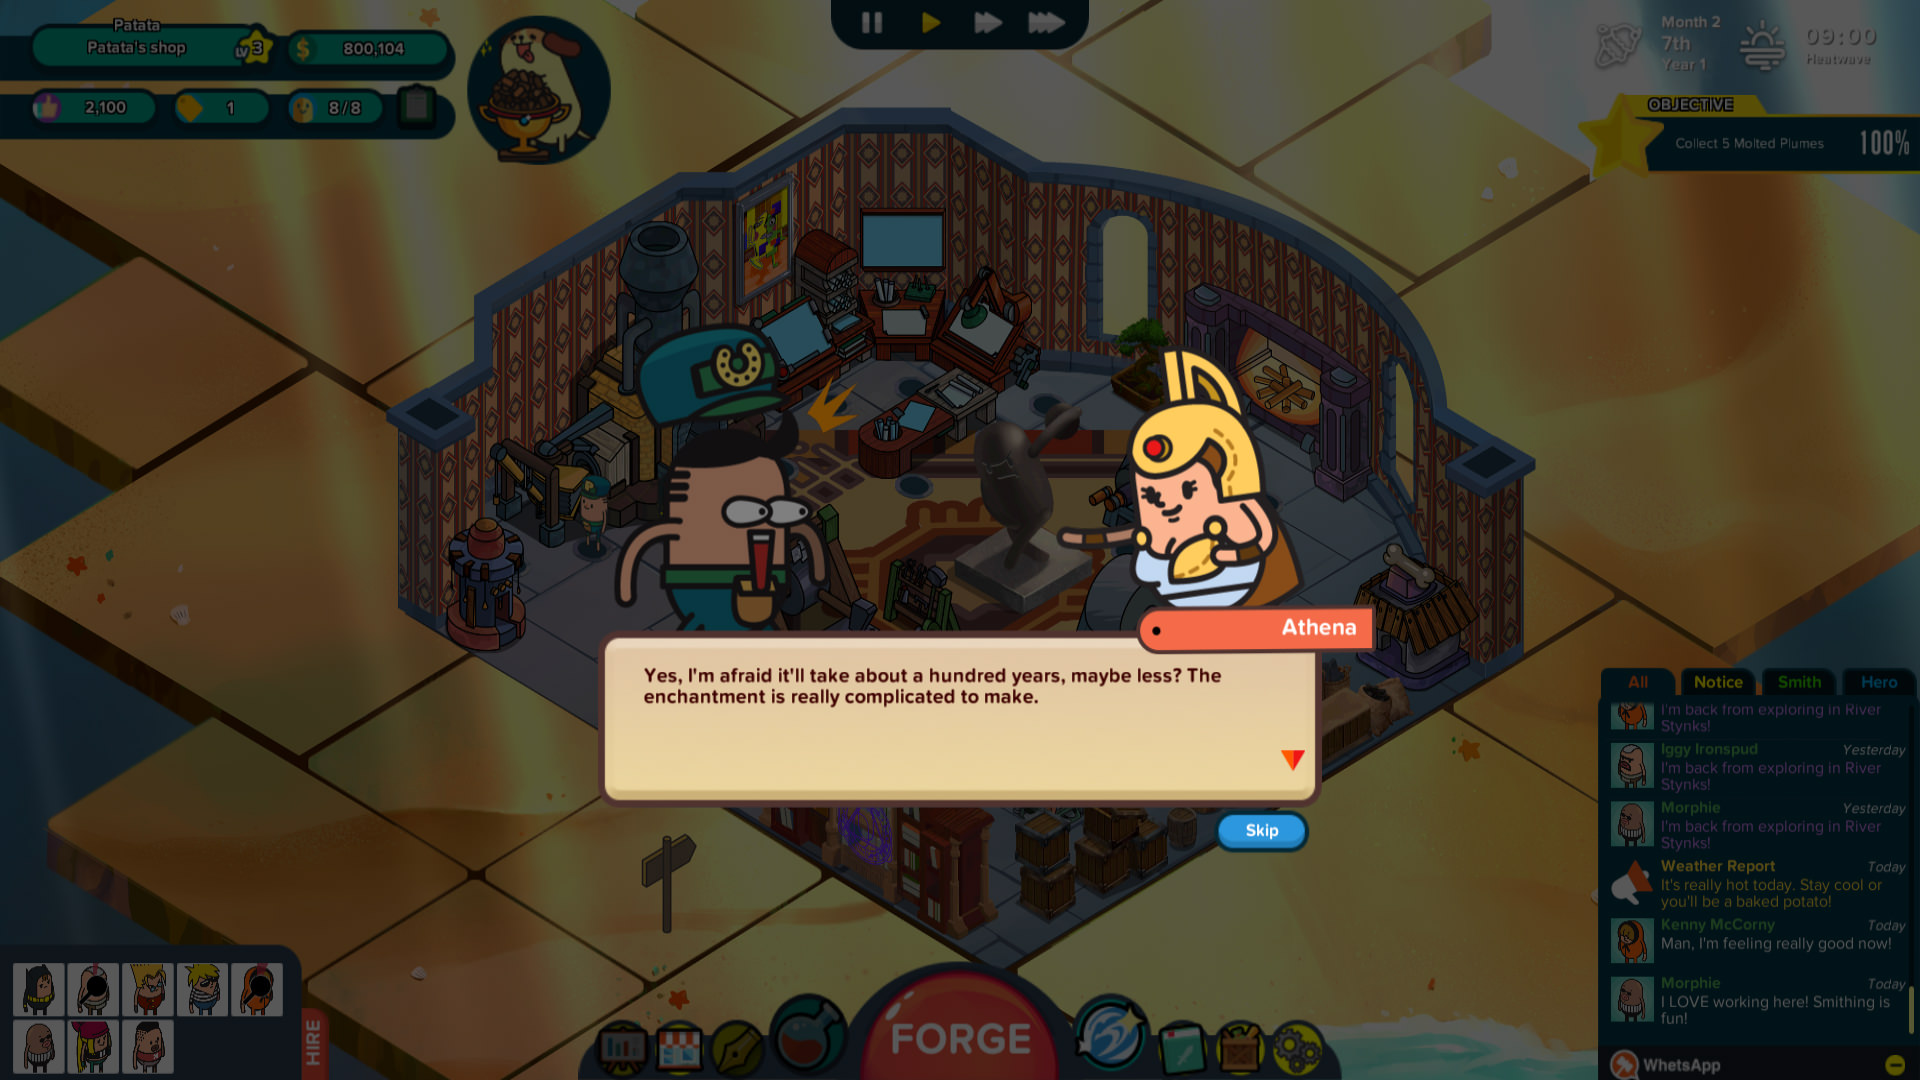 Holy Potatoes! A Weapon Shop?! - Spud Tales: Journey to Olympus screenshot